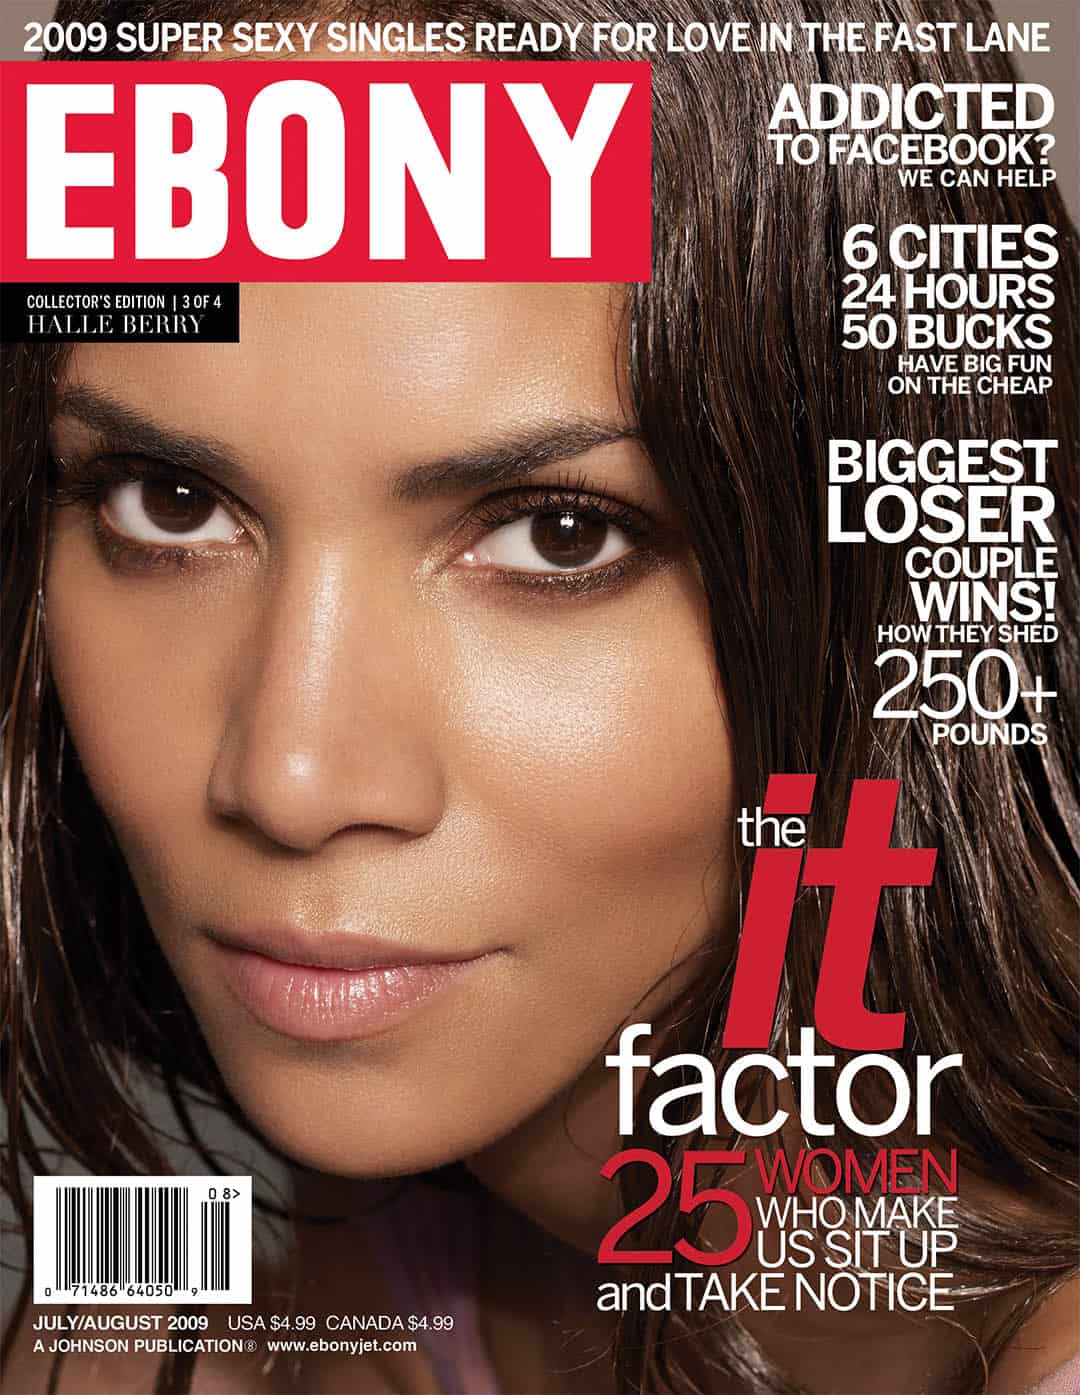 Black History from the Pages of EBONY: African-Americans in the Obama Era 